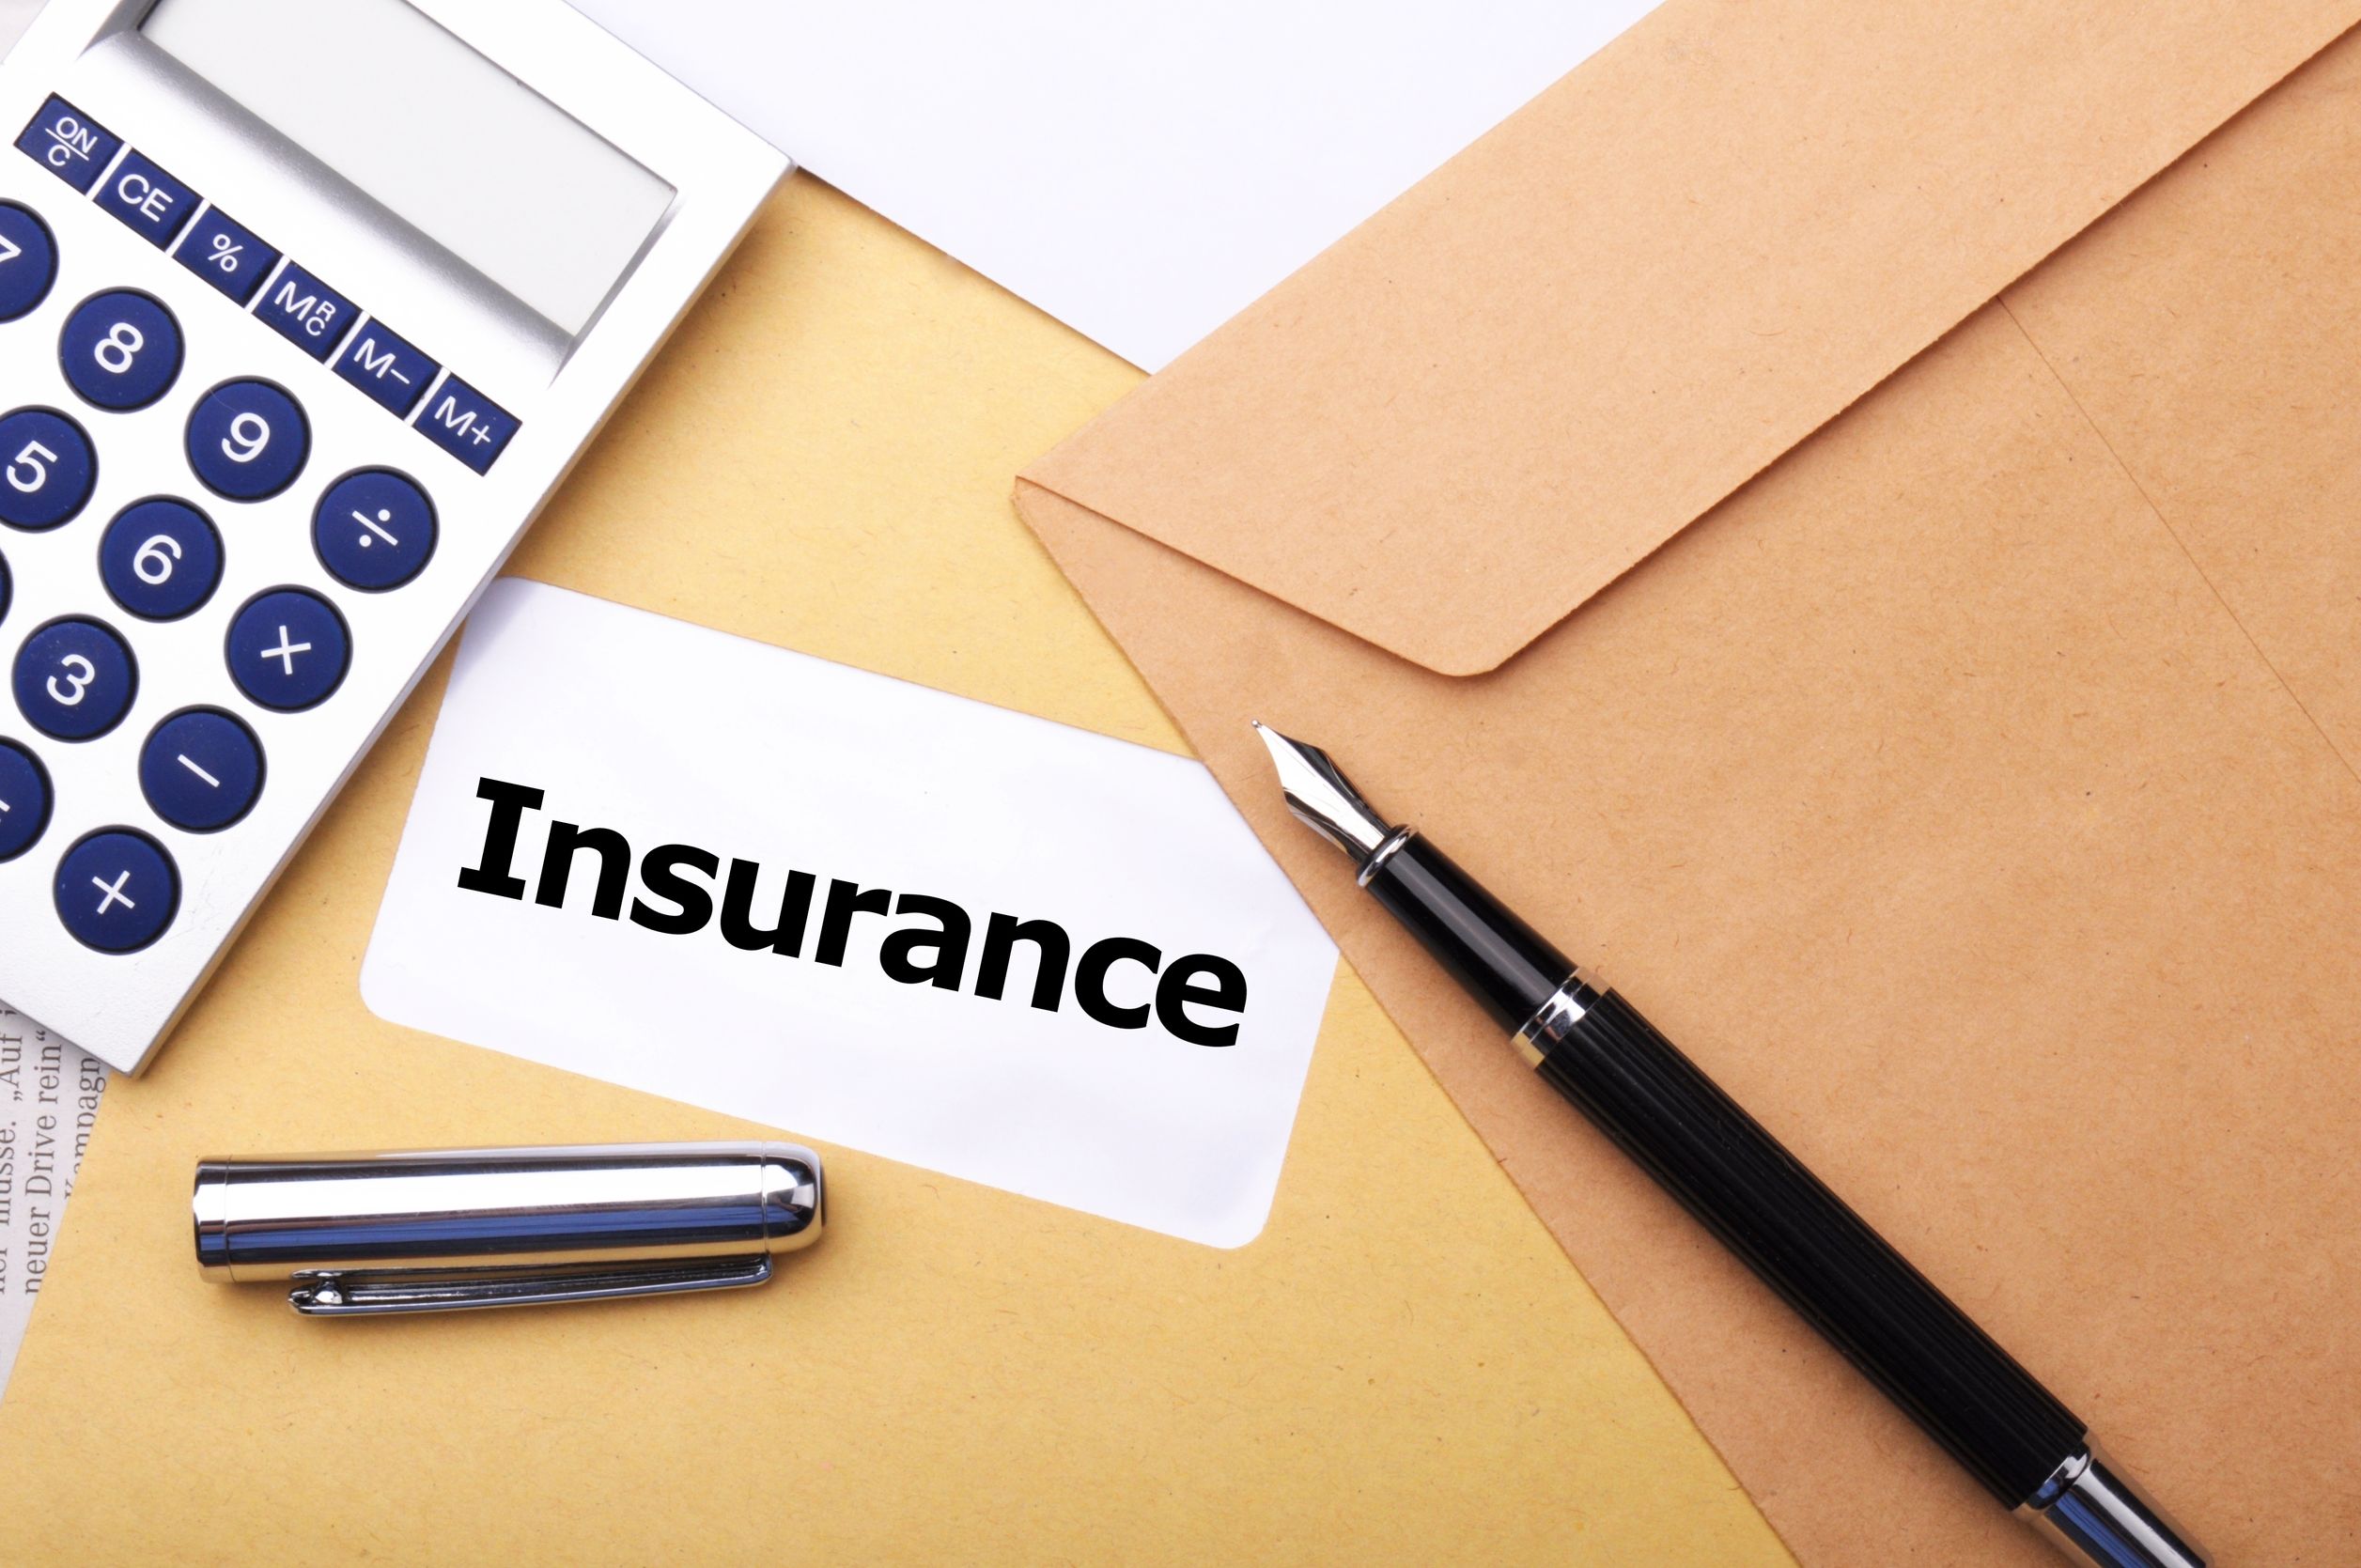 A Good Insurance Assessor in the UK Can Help Ensure That the Funds You Receive Are Fair